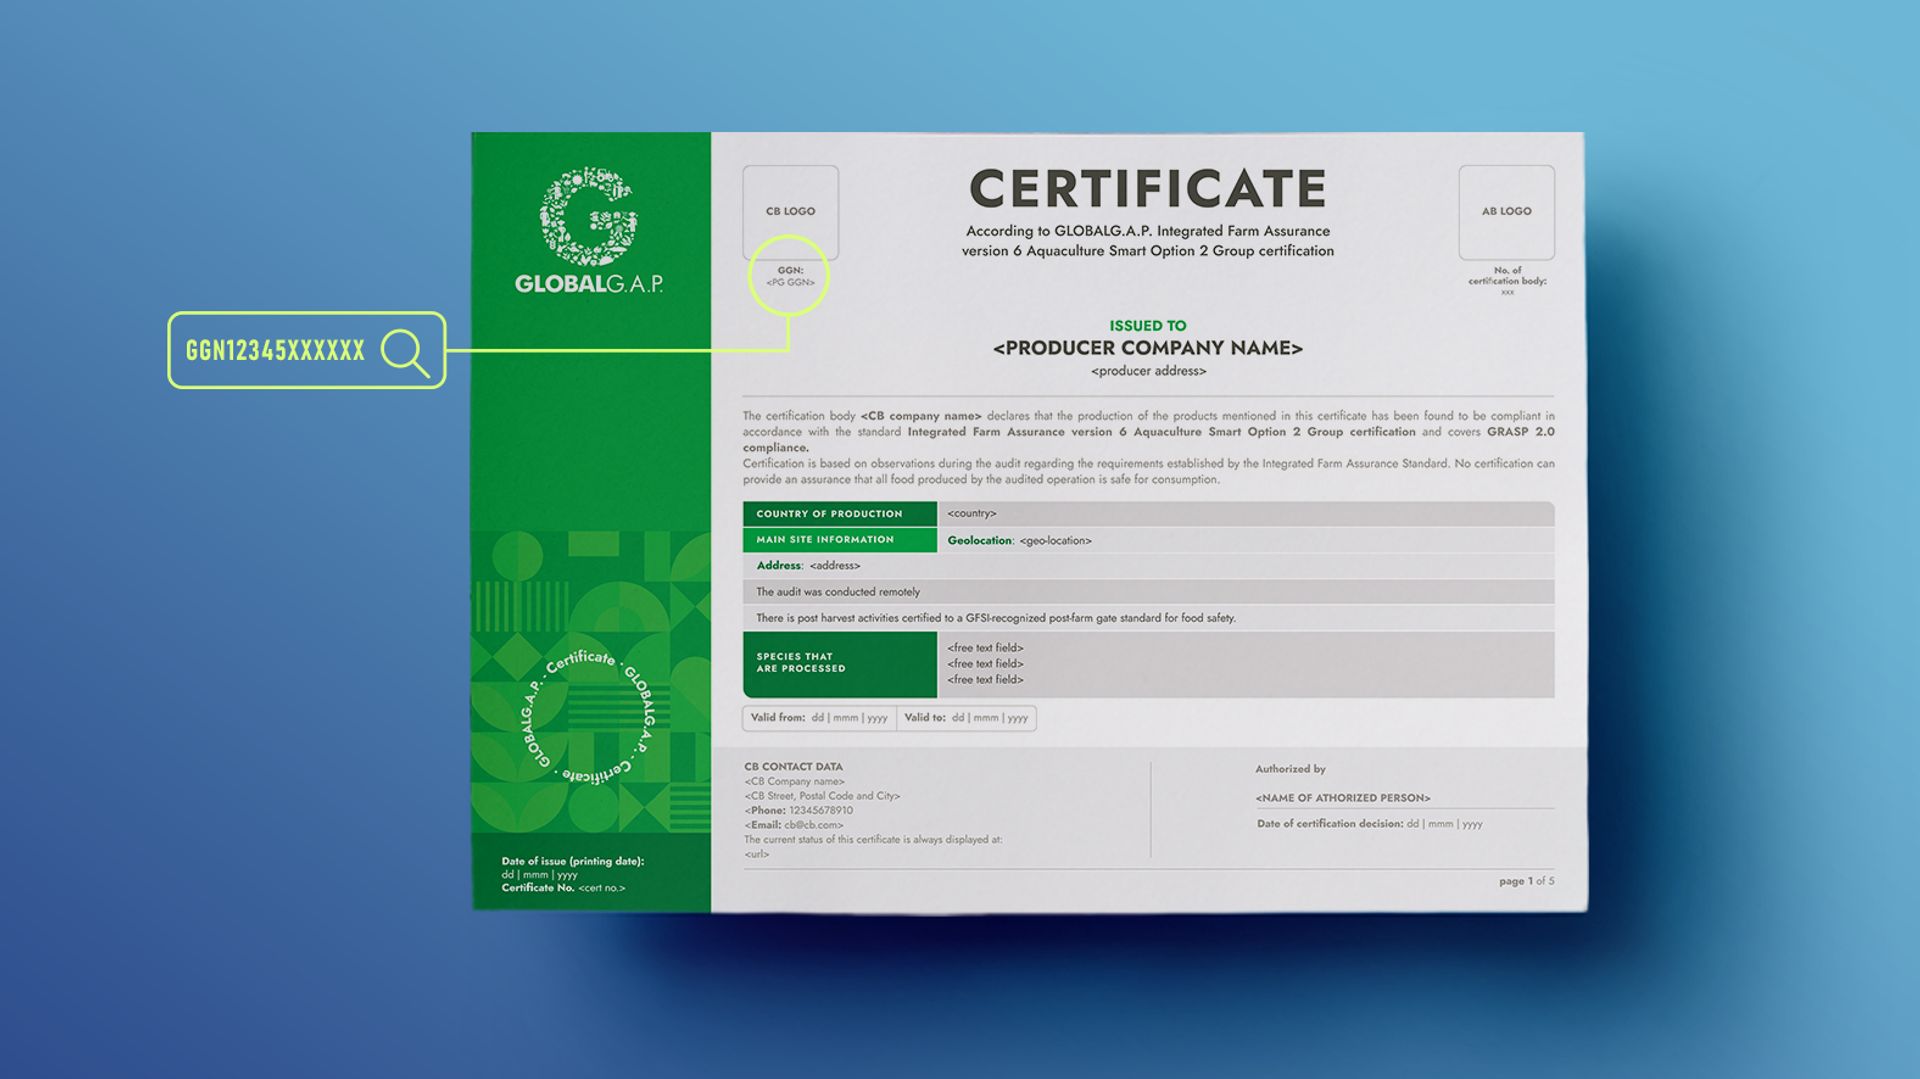 Image of a GLOBALG.A.P. certificate with highlighted GLOBALG.A.P. identification number